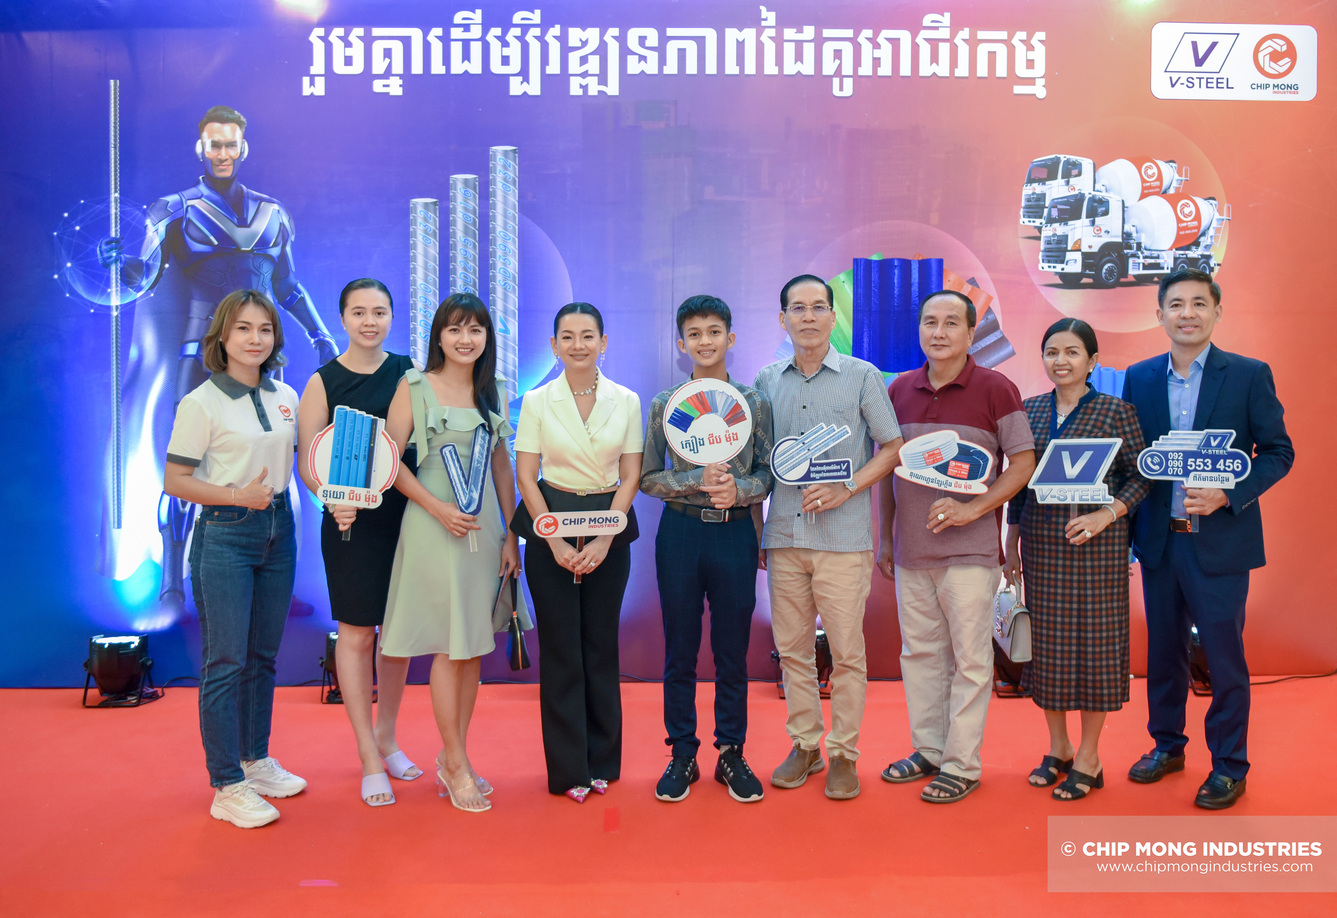 Chip Mong Industries Hosted a Party for Dealer in Battambang Province.